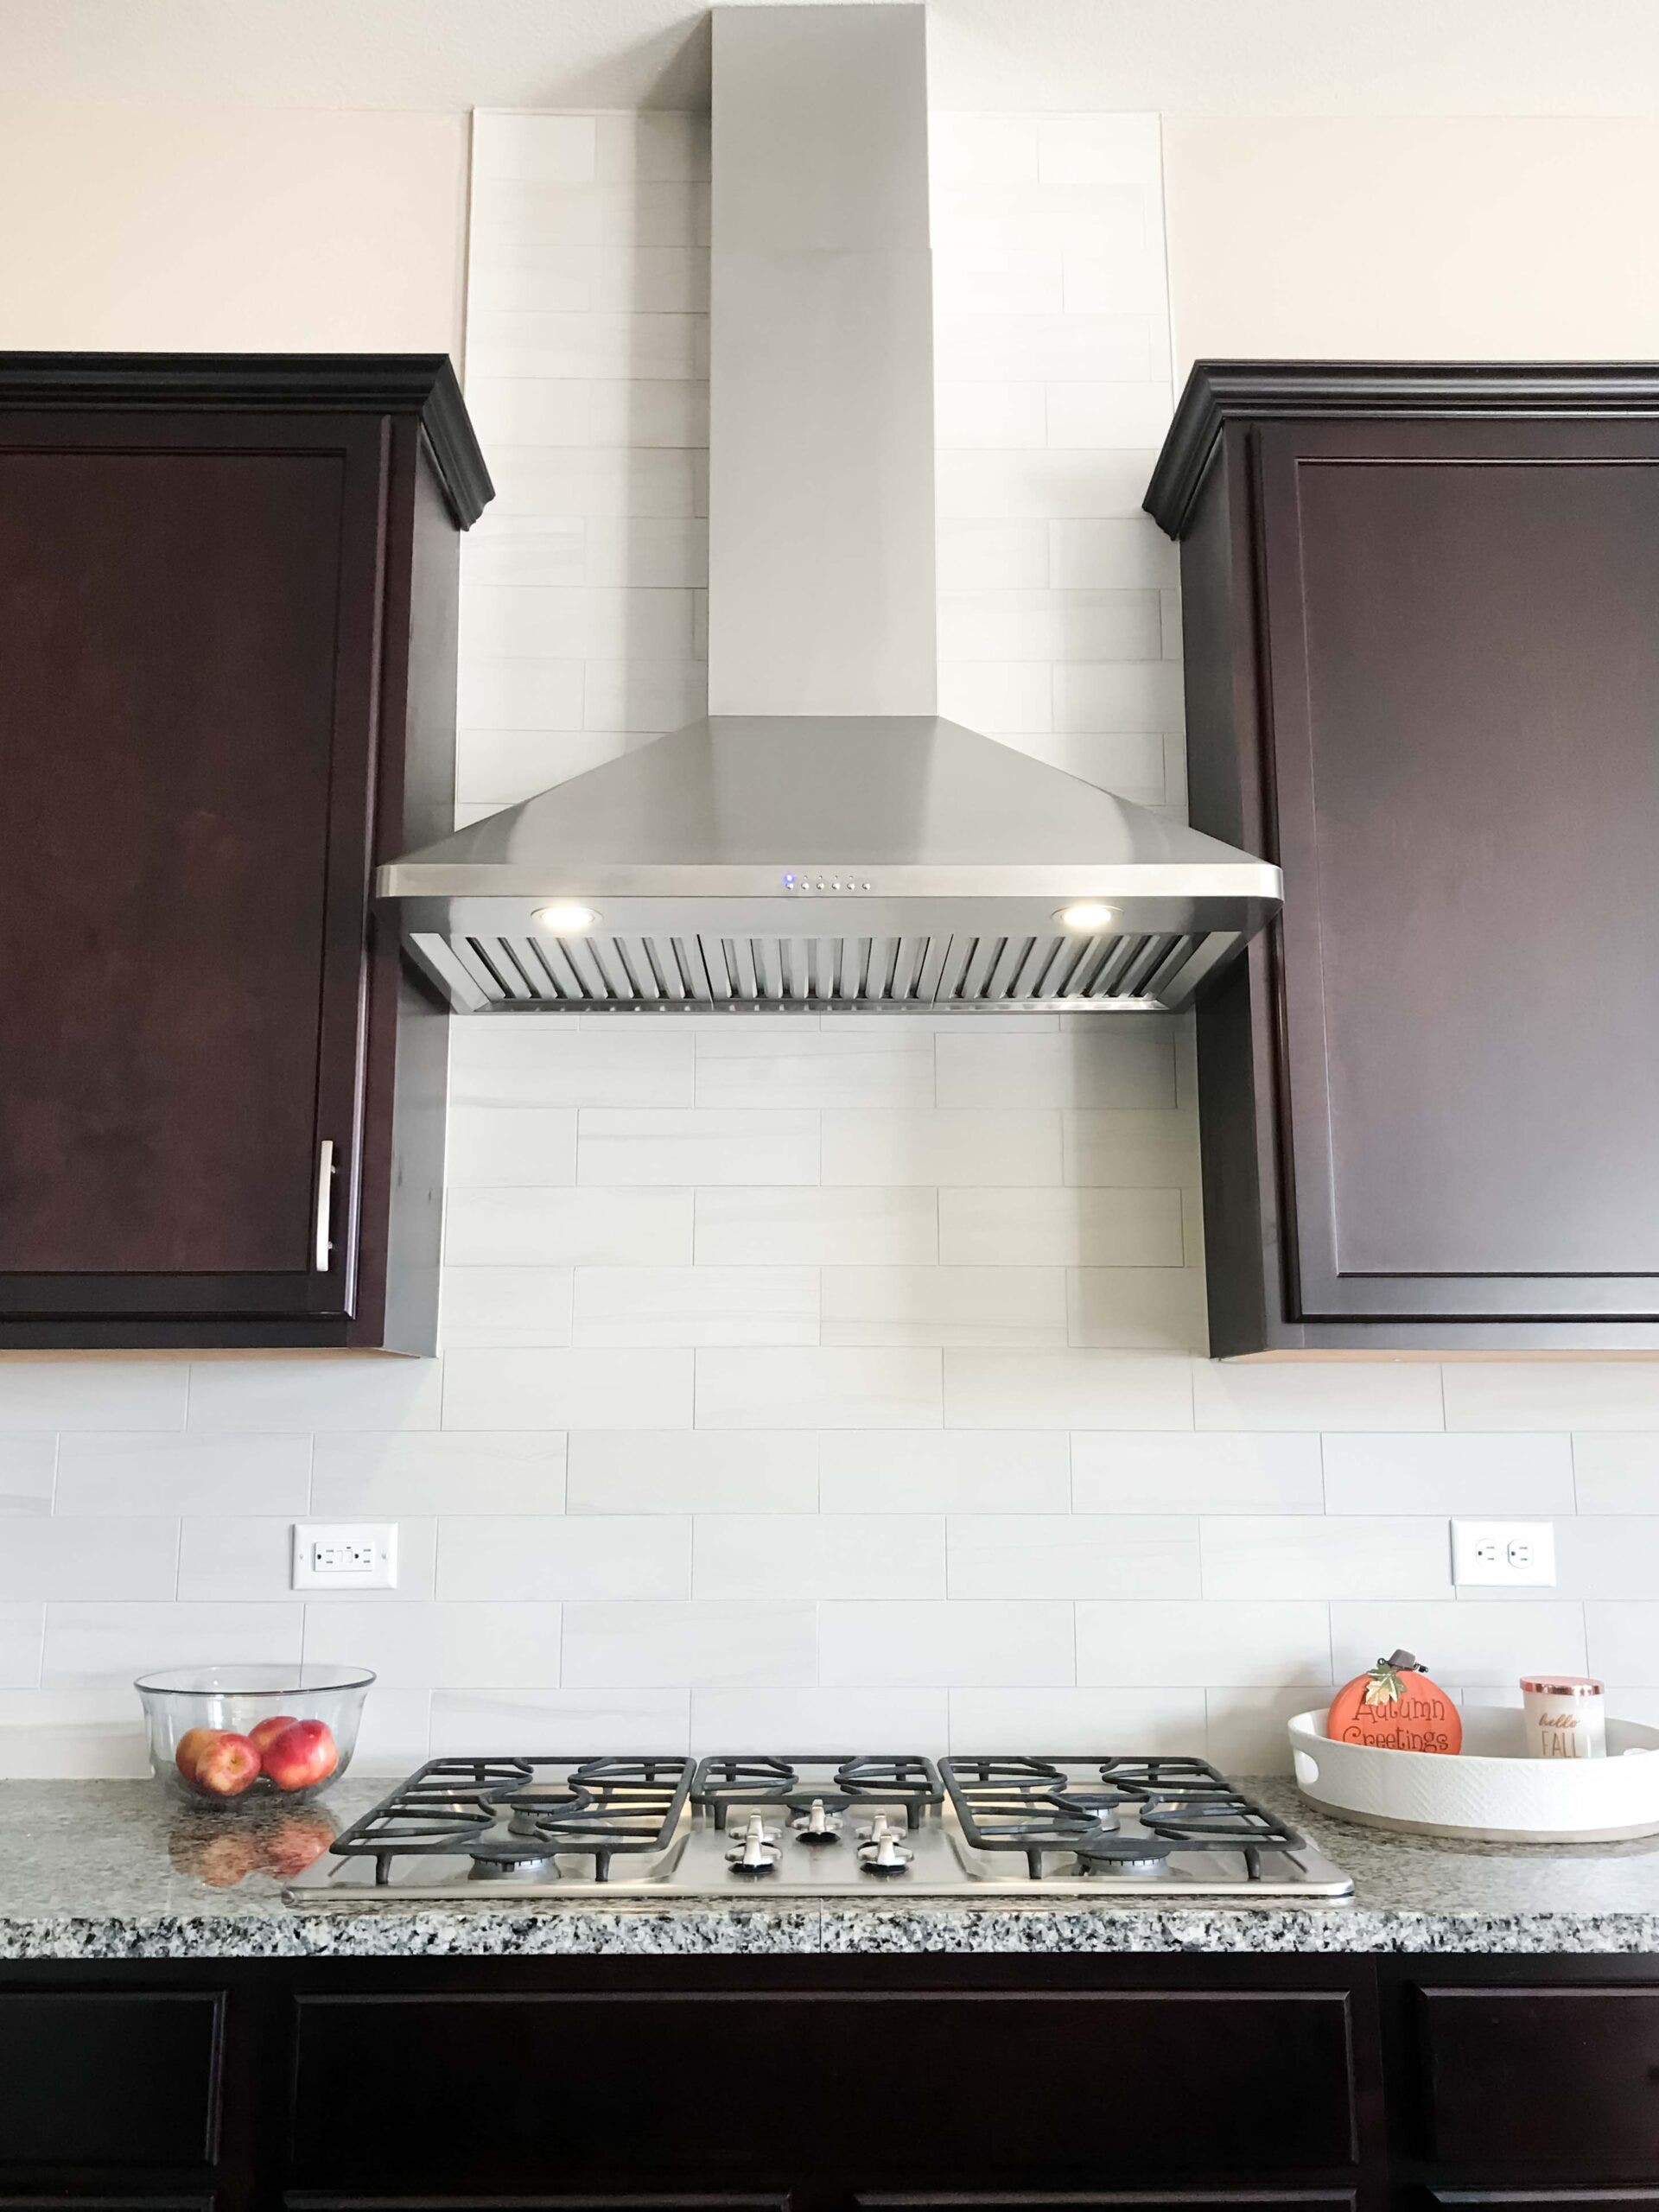 Clean Your Range Hood Blower In 10 Minutes Or Less Proline Blog